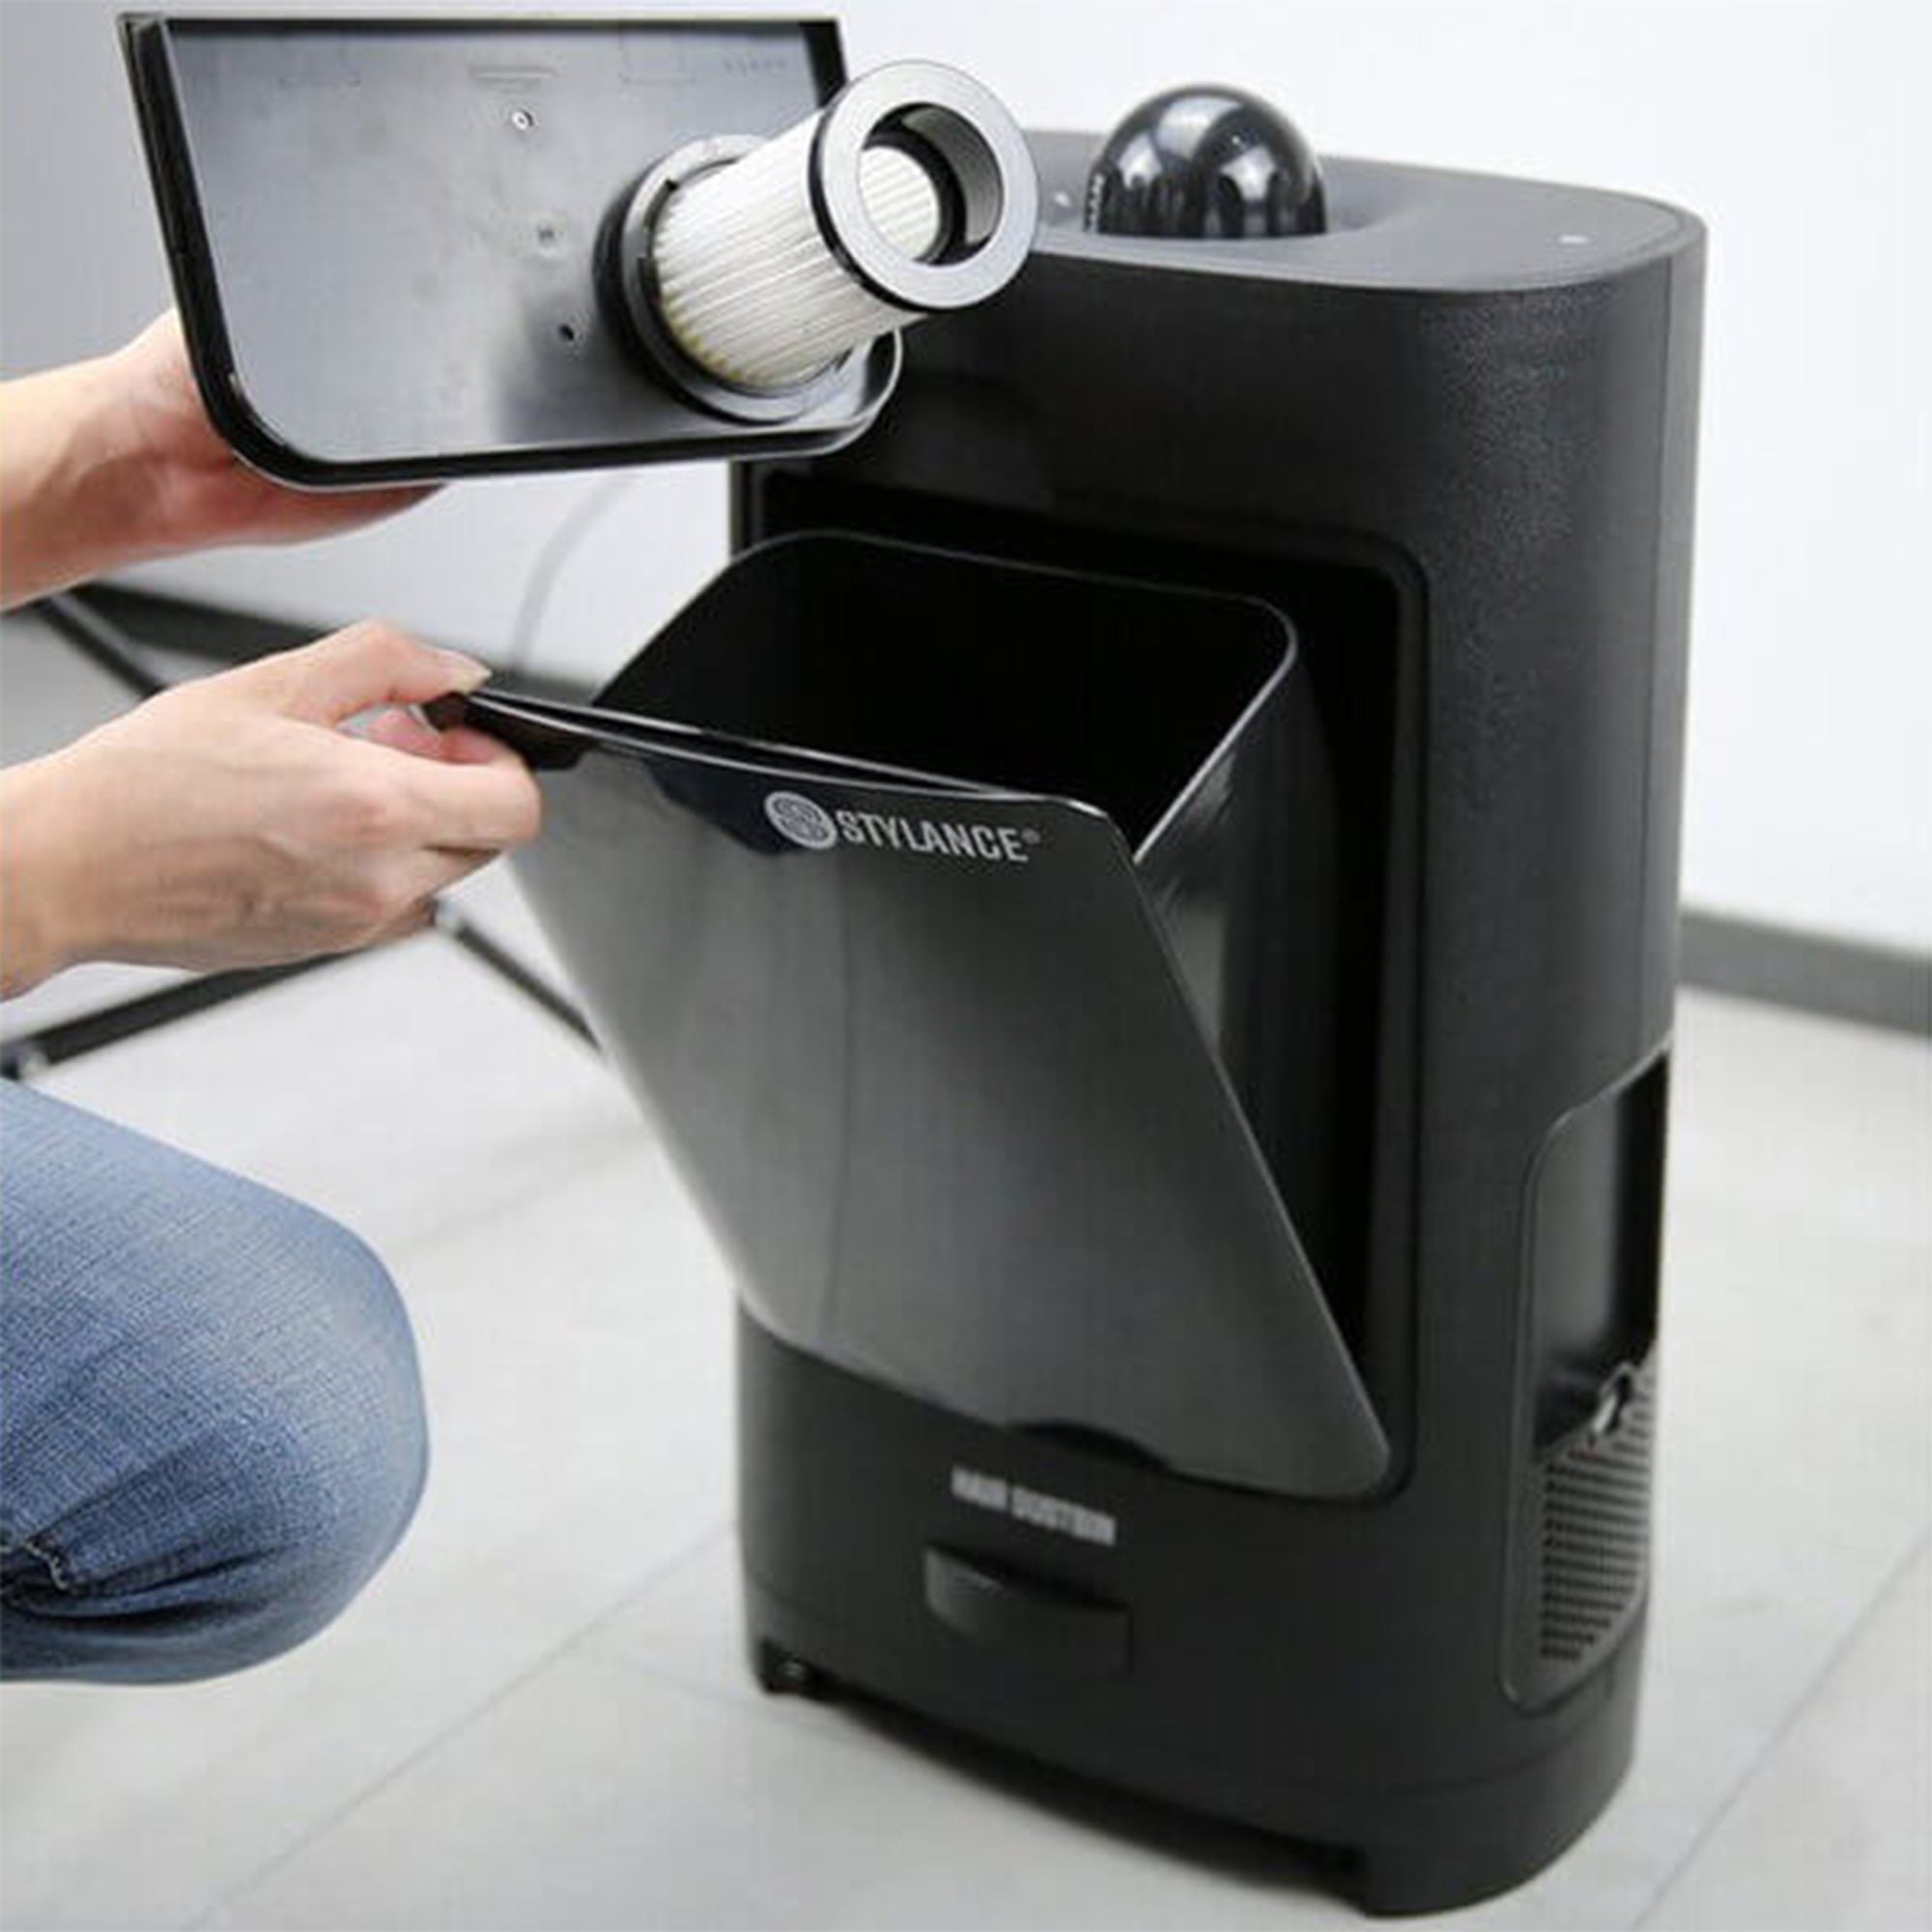 Stylance - Vacuum Hair Dustbin Automatic Suction Infrared Sensor 1400W